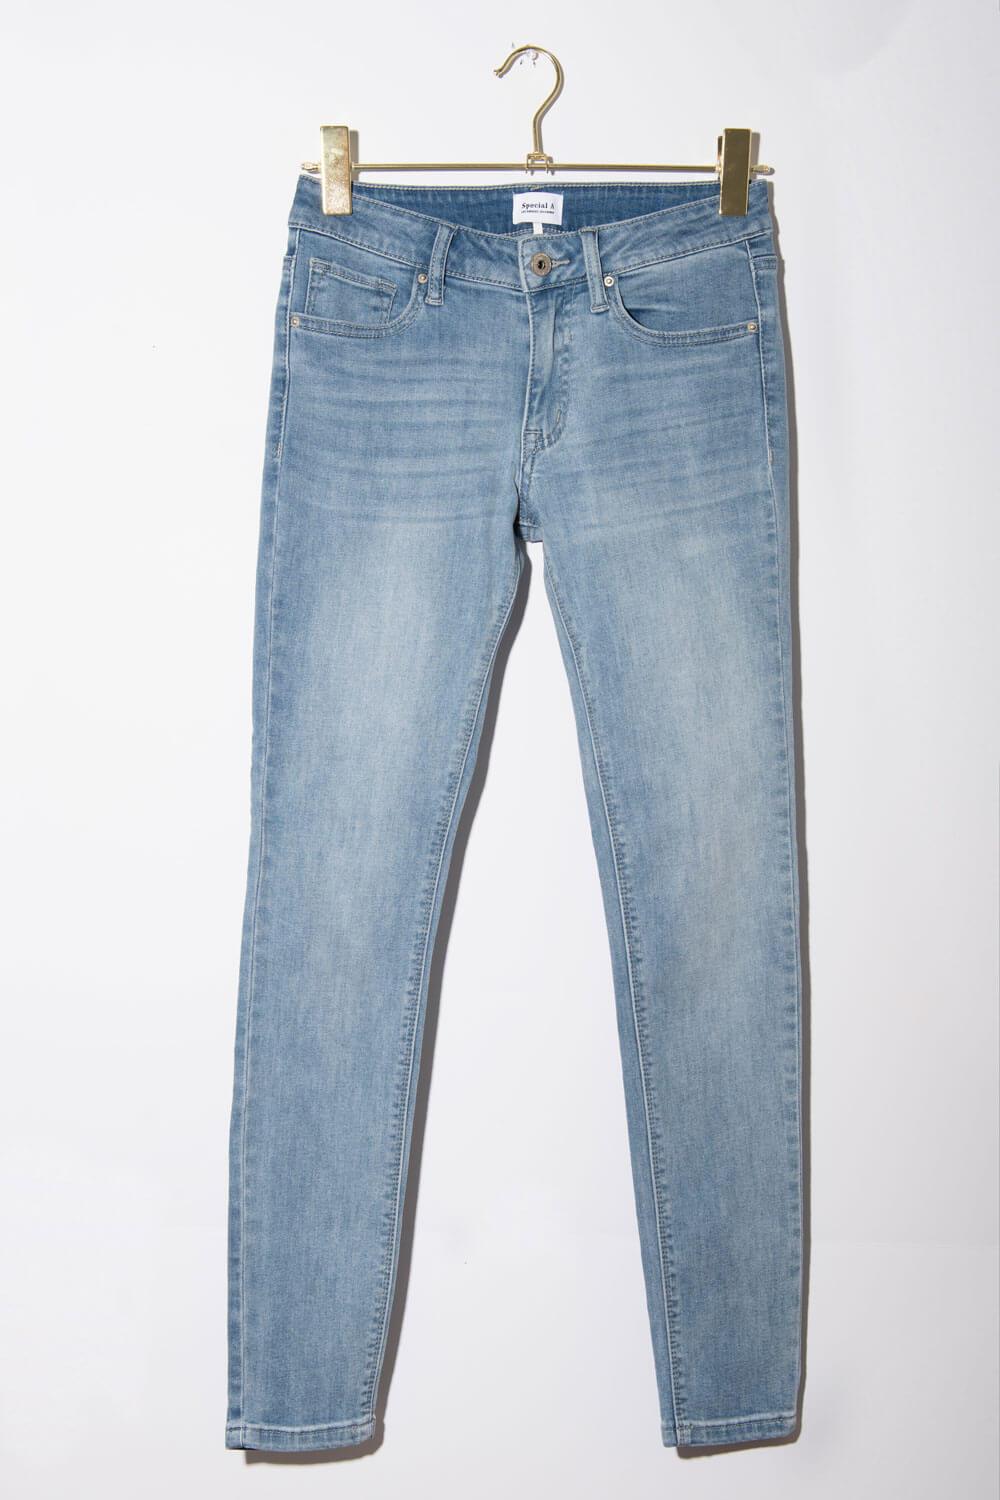 Skinny Mid Rise Light Wash Jeans